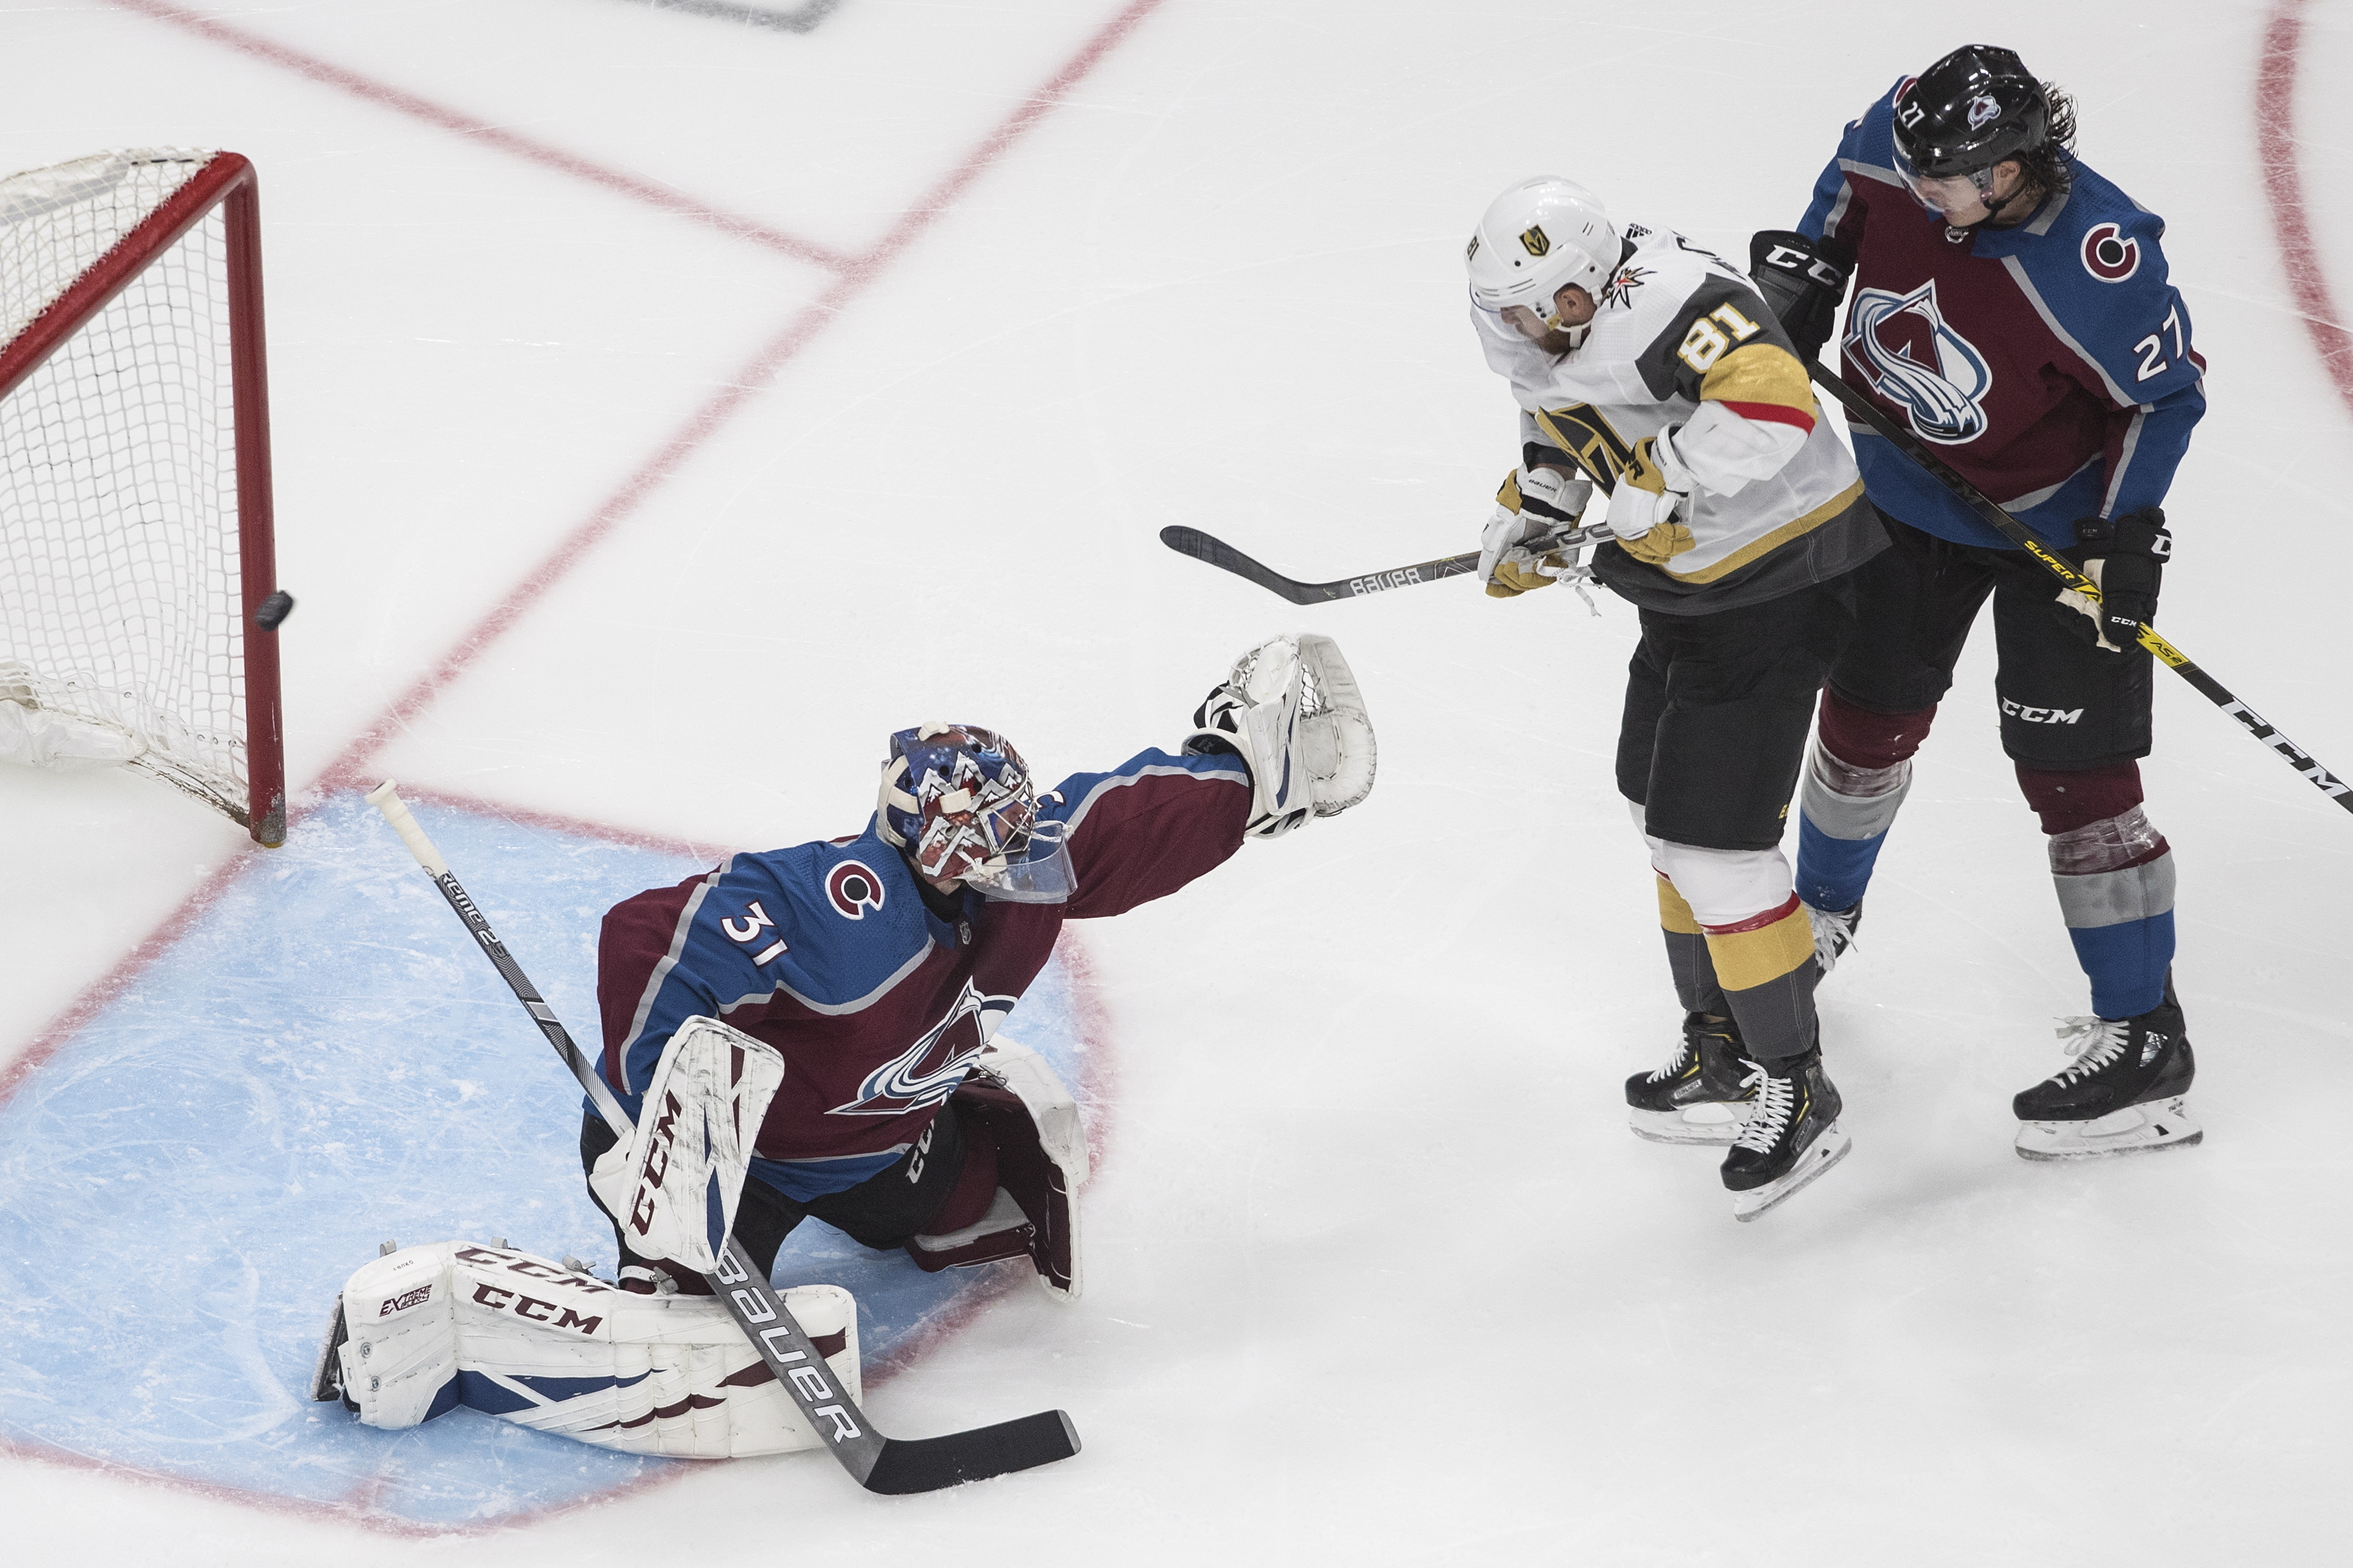 Tuch scores in OT, Knights beat Avs 4-3, earn top seed